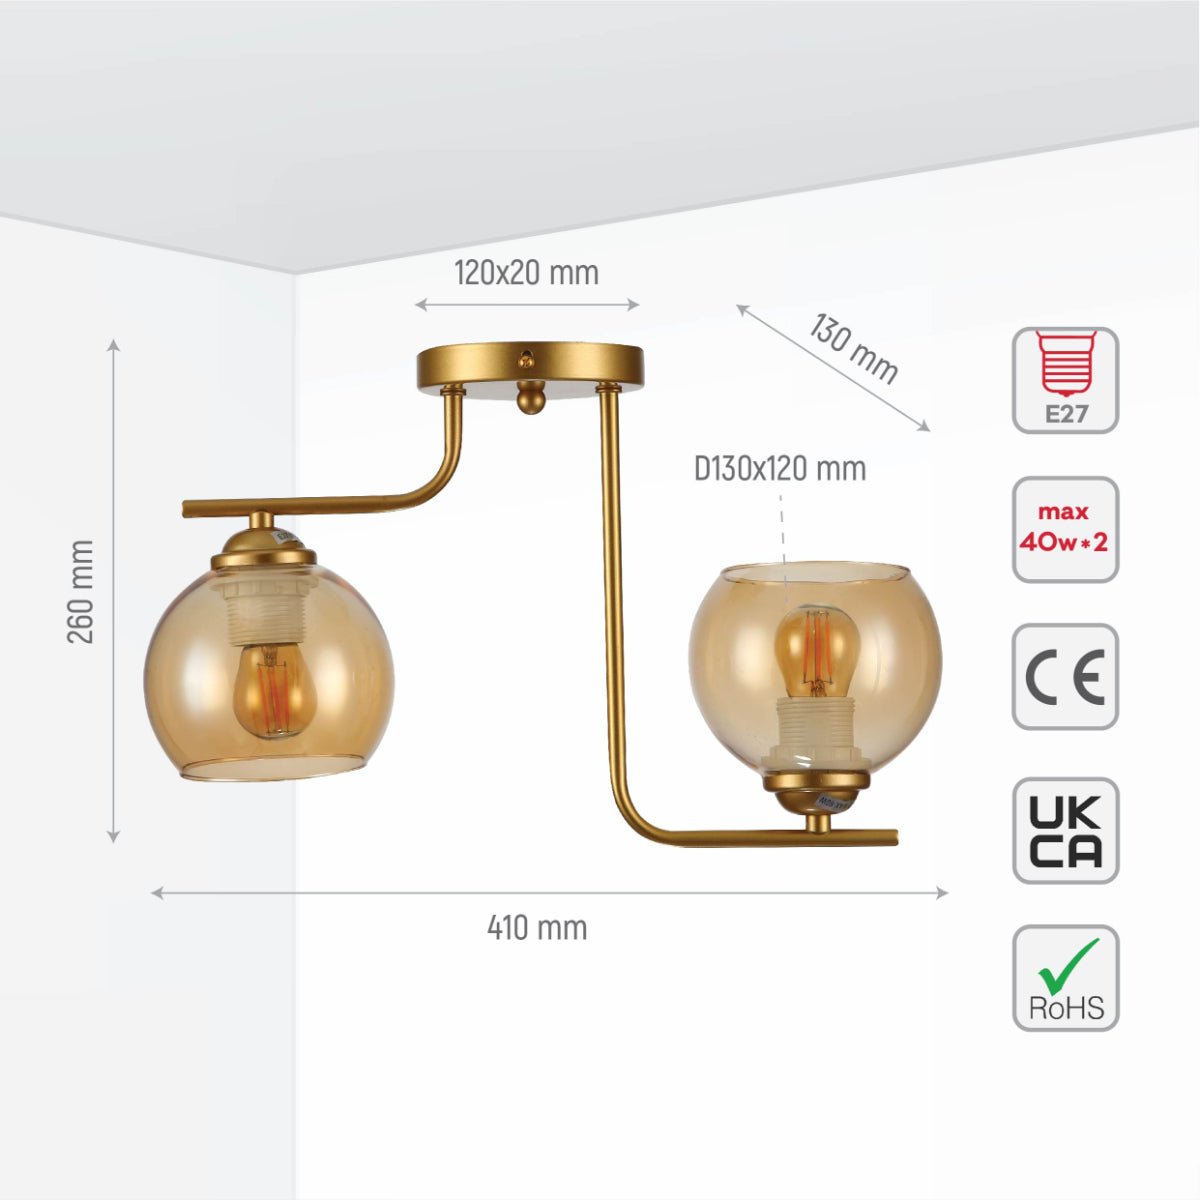 Size and specs of Gold L shape Metal Amber Dome Glass Ceiling Light with E27 Fittings | TEKLED 159-17626